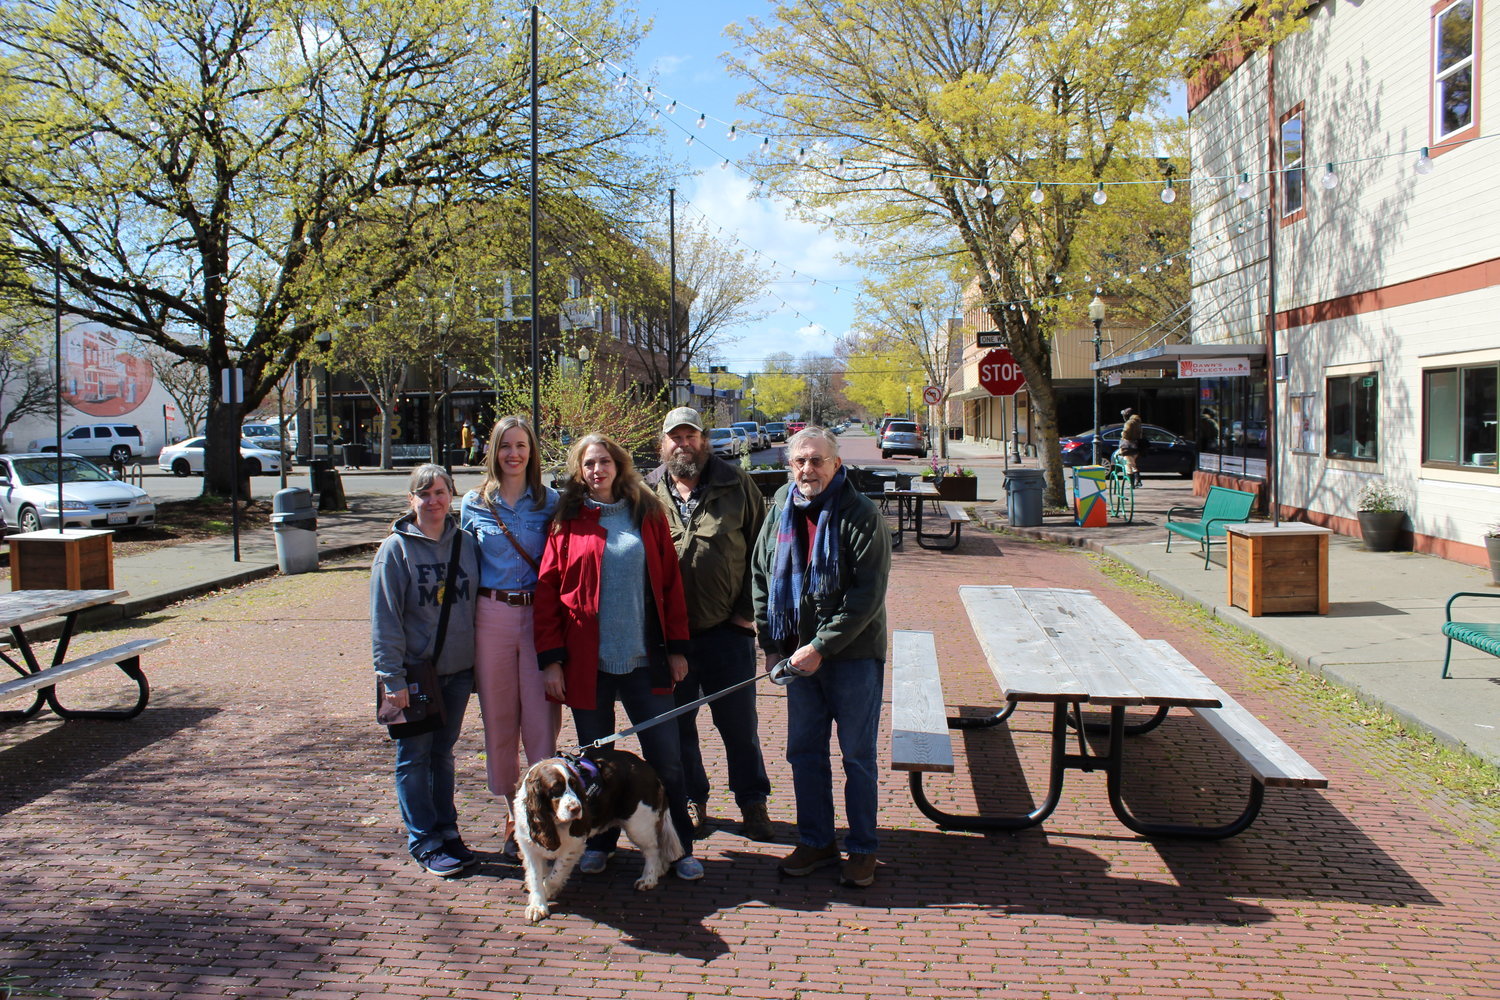 Centralia Farmers Market supporters Wanda Steger, Sarah Althauser, Marie Shankle, Brett Shankle, Bruce Yost and market mascot Beatrice gather in Pine Street Plaza earlier this year. After four seasons at the Centralia Factory Outlet, the market opened its season May 6 back in the heart of the downtown core.